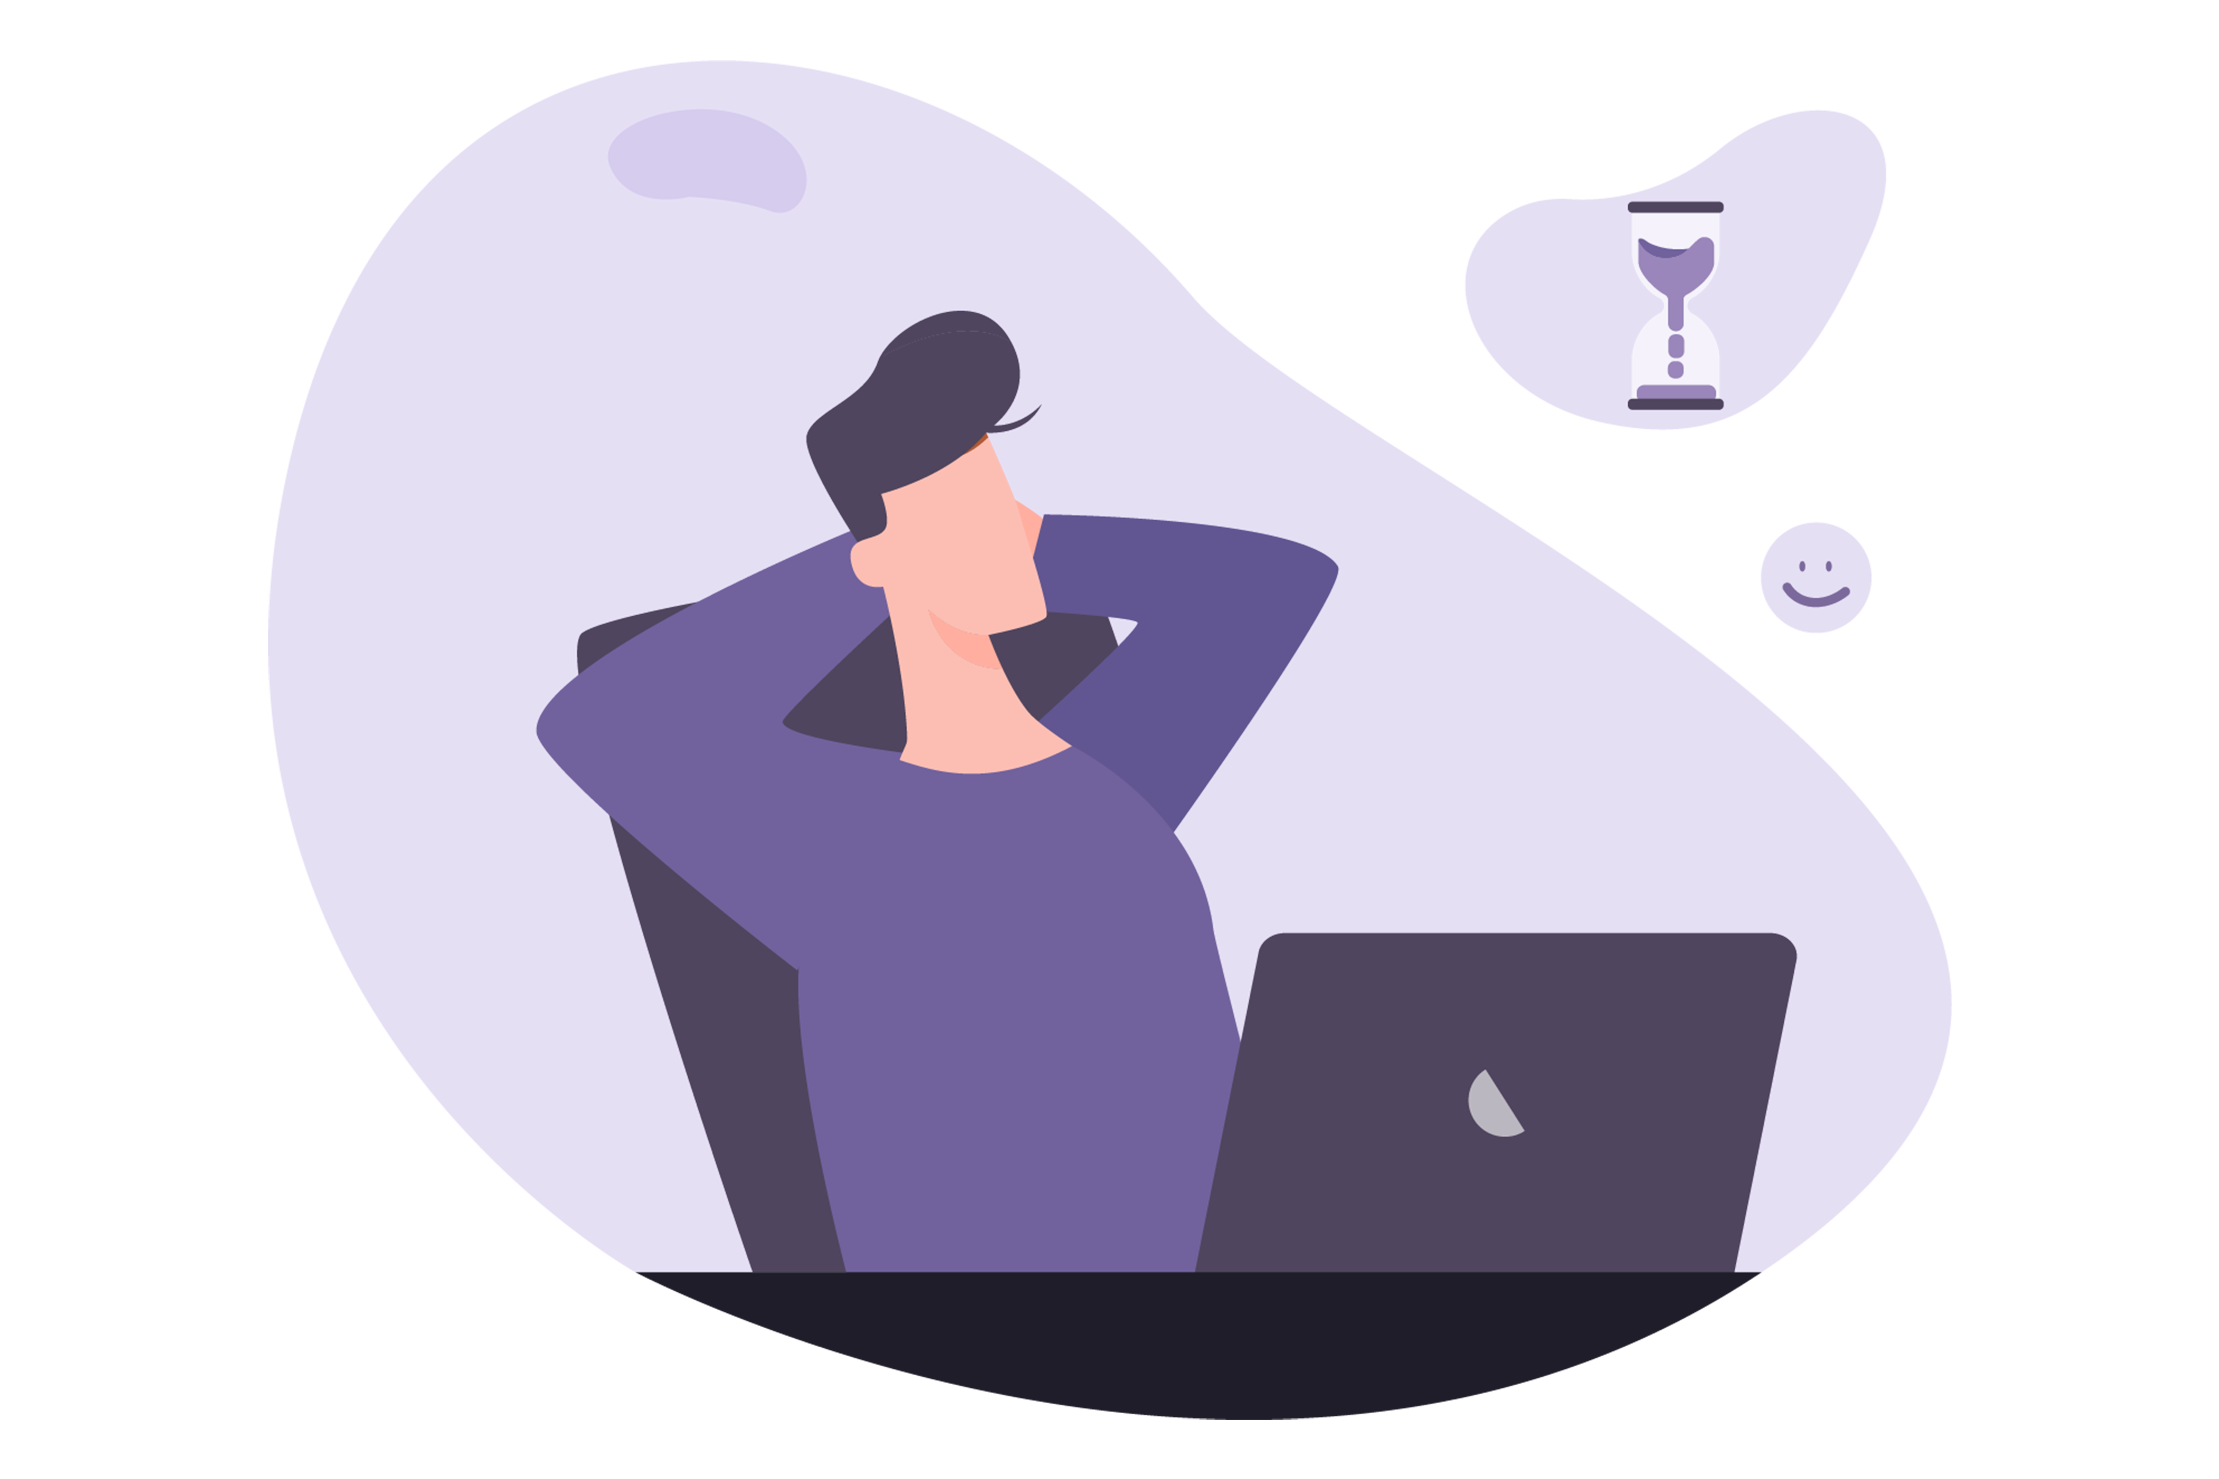 Purple blobbed illustration of man relaxing at work as he saves time through digitising payments